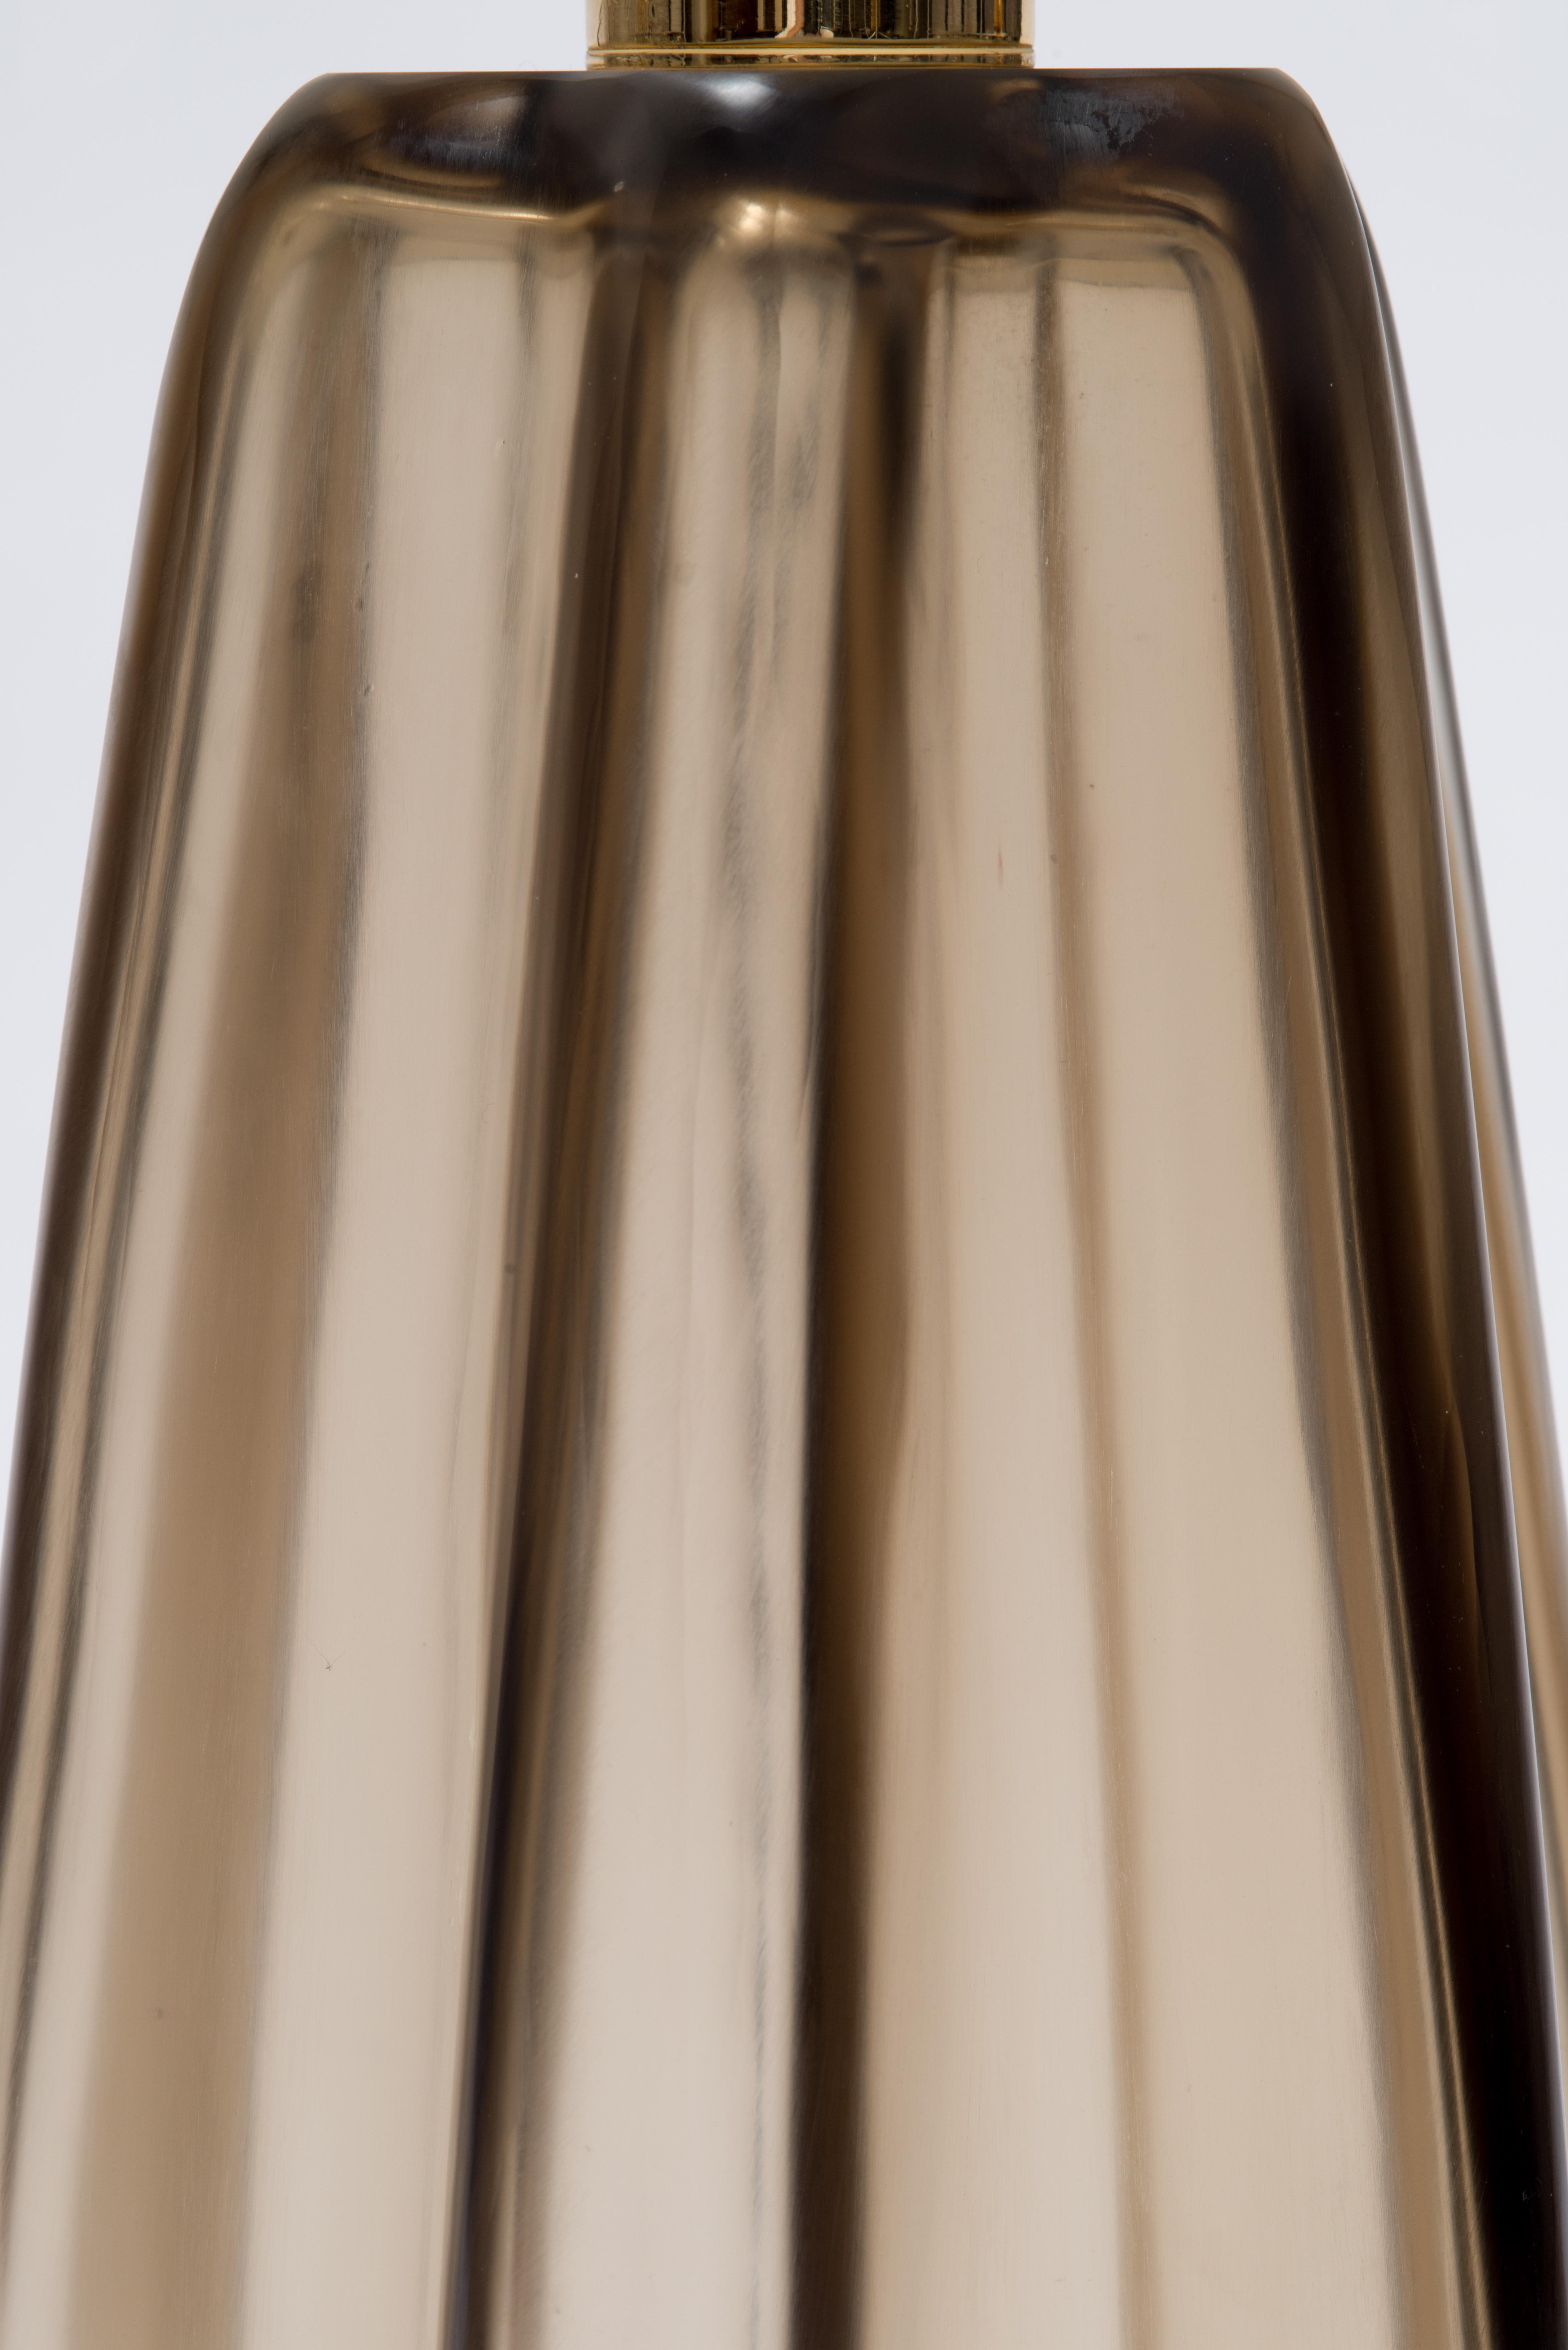 Modern Donghia Margot Table Lamp and Shade, Murano Glass in Sepia with Satin Finish For Sale